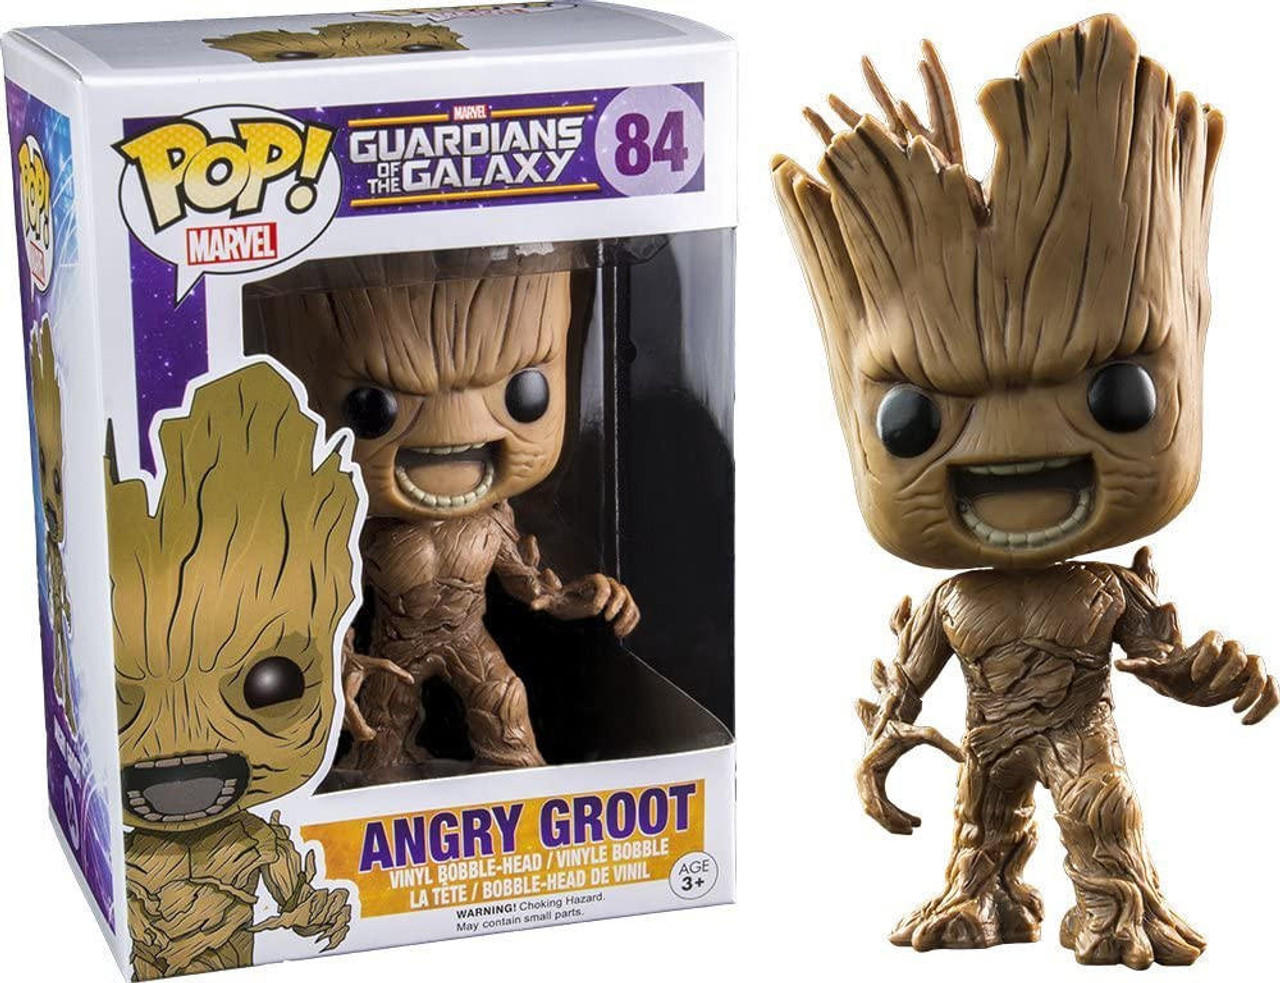 Funko Pop! Marvel 84 Guardians of the Galaxy Angry Groot Vinyl Bobblehead  Figure - We-R-Toys